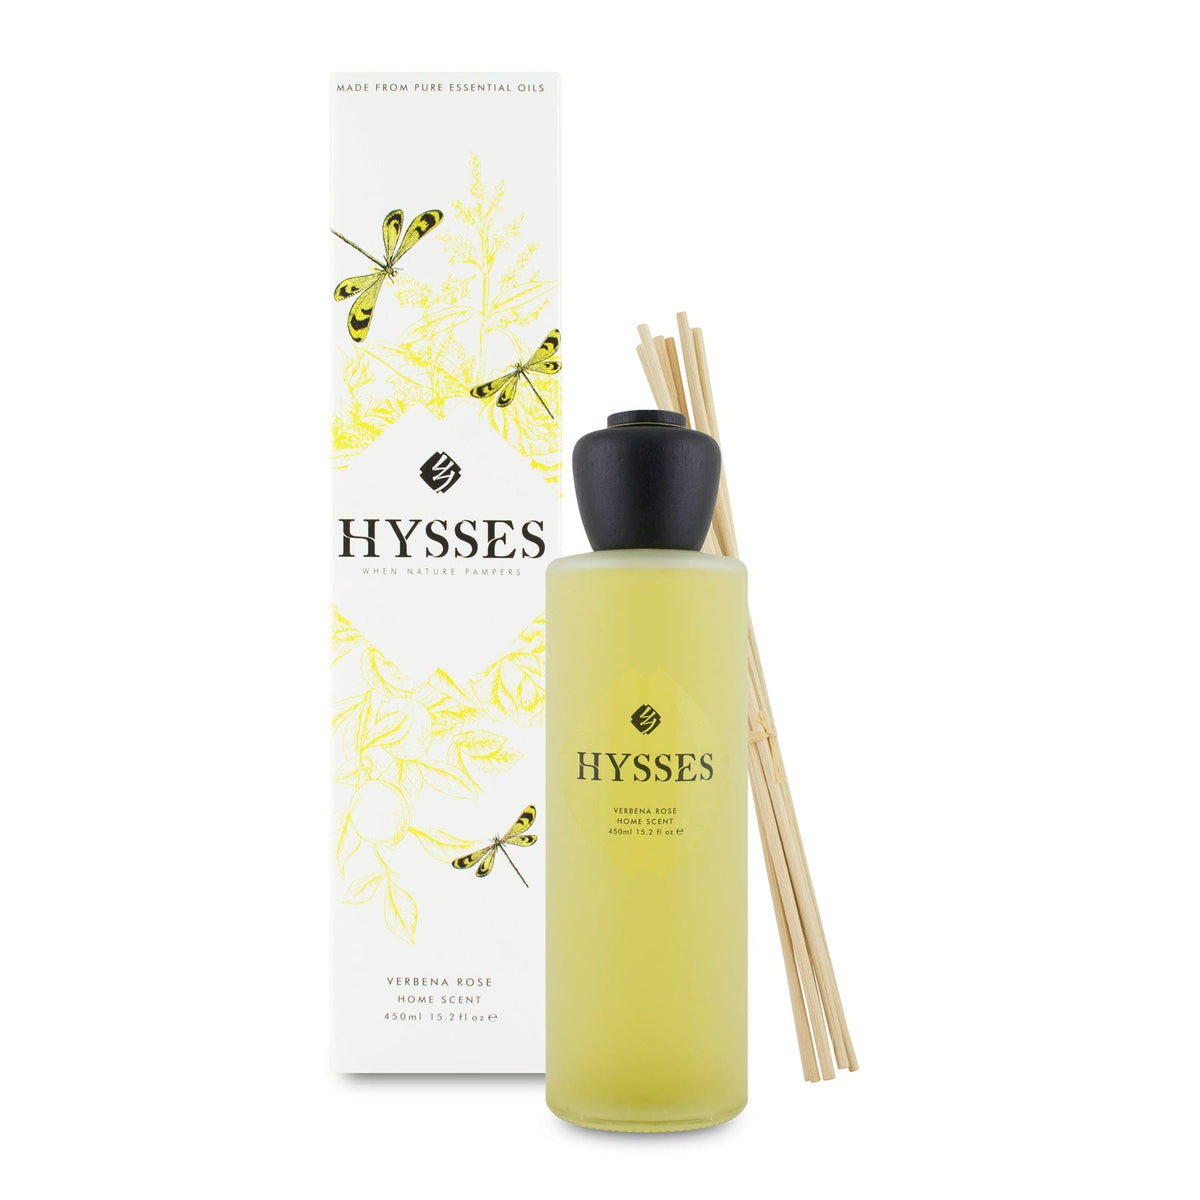 Verbena Rose Home Scent Reed Diffuser - HYSSES